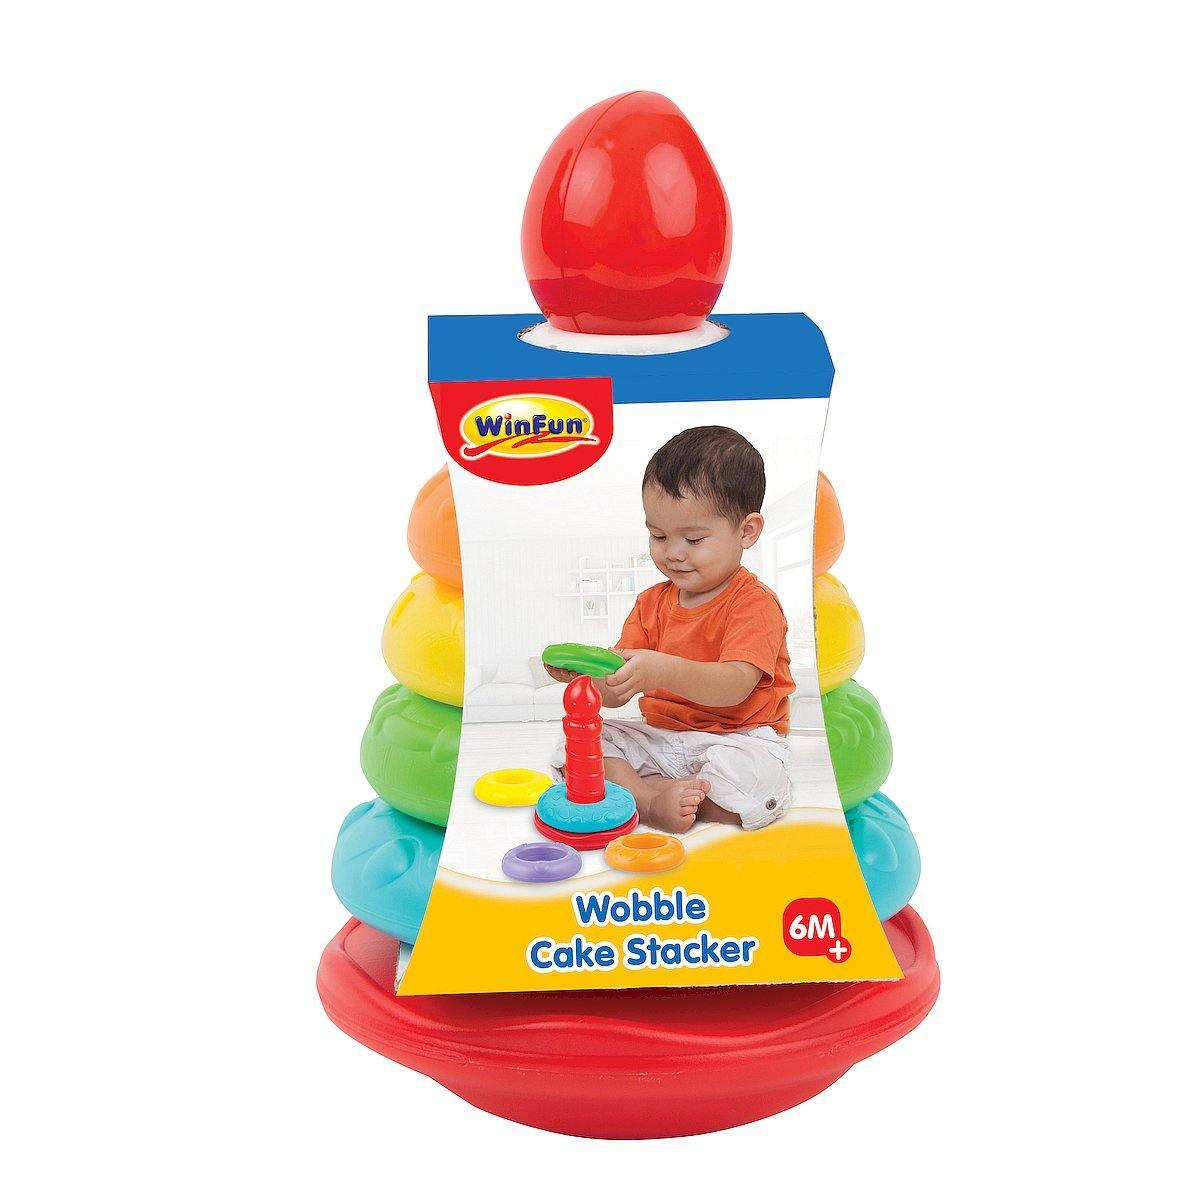 WinFun Wobble Cake Stacker - BumbleToys - 2-4 Years, Cecil, Nursery Toys, Play-doh, Unisex